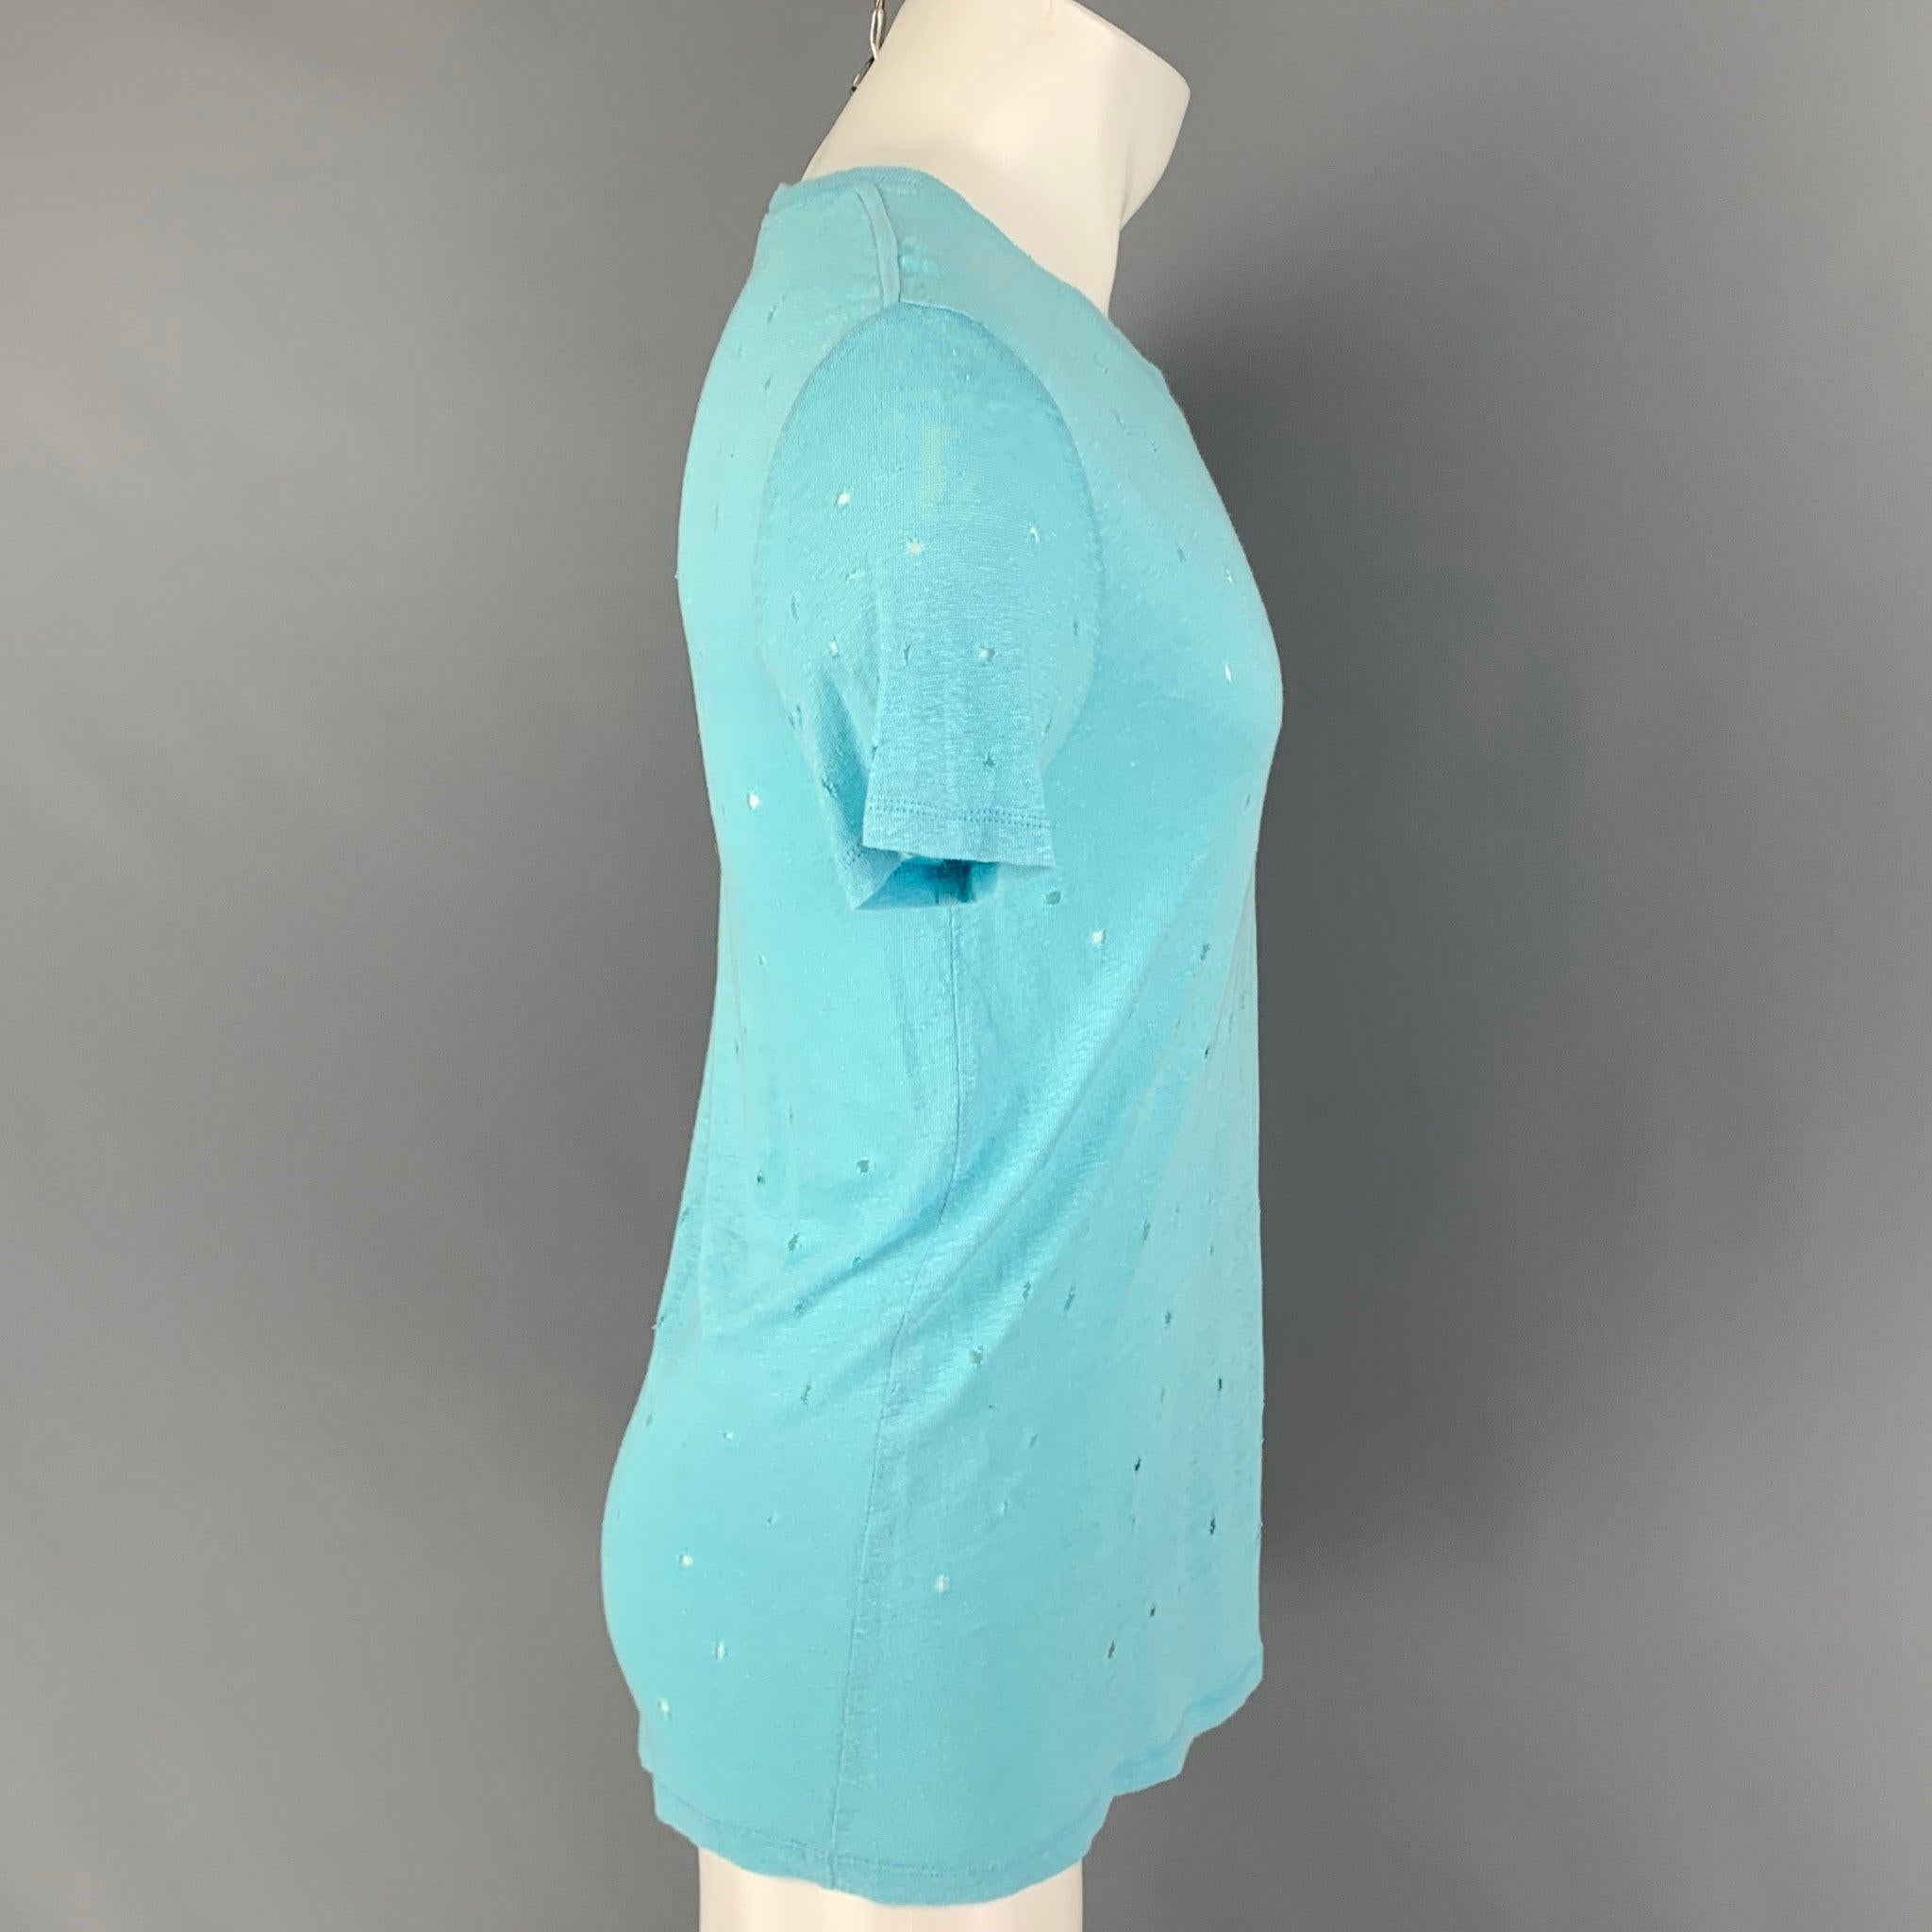 IRO 'Clay' t-shirt comes in a light blue linen featuring distressed details throughout and a crew-neck. Made in Portugal.
Very Good Pre-Owned Condition.  

Marked:   S 

Measurements: 
 
Shoulder: 18 inches  Chest: 38 inches  Sleeve: 8 inches